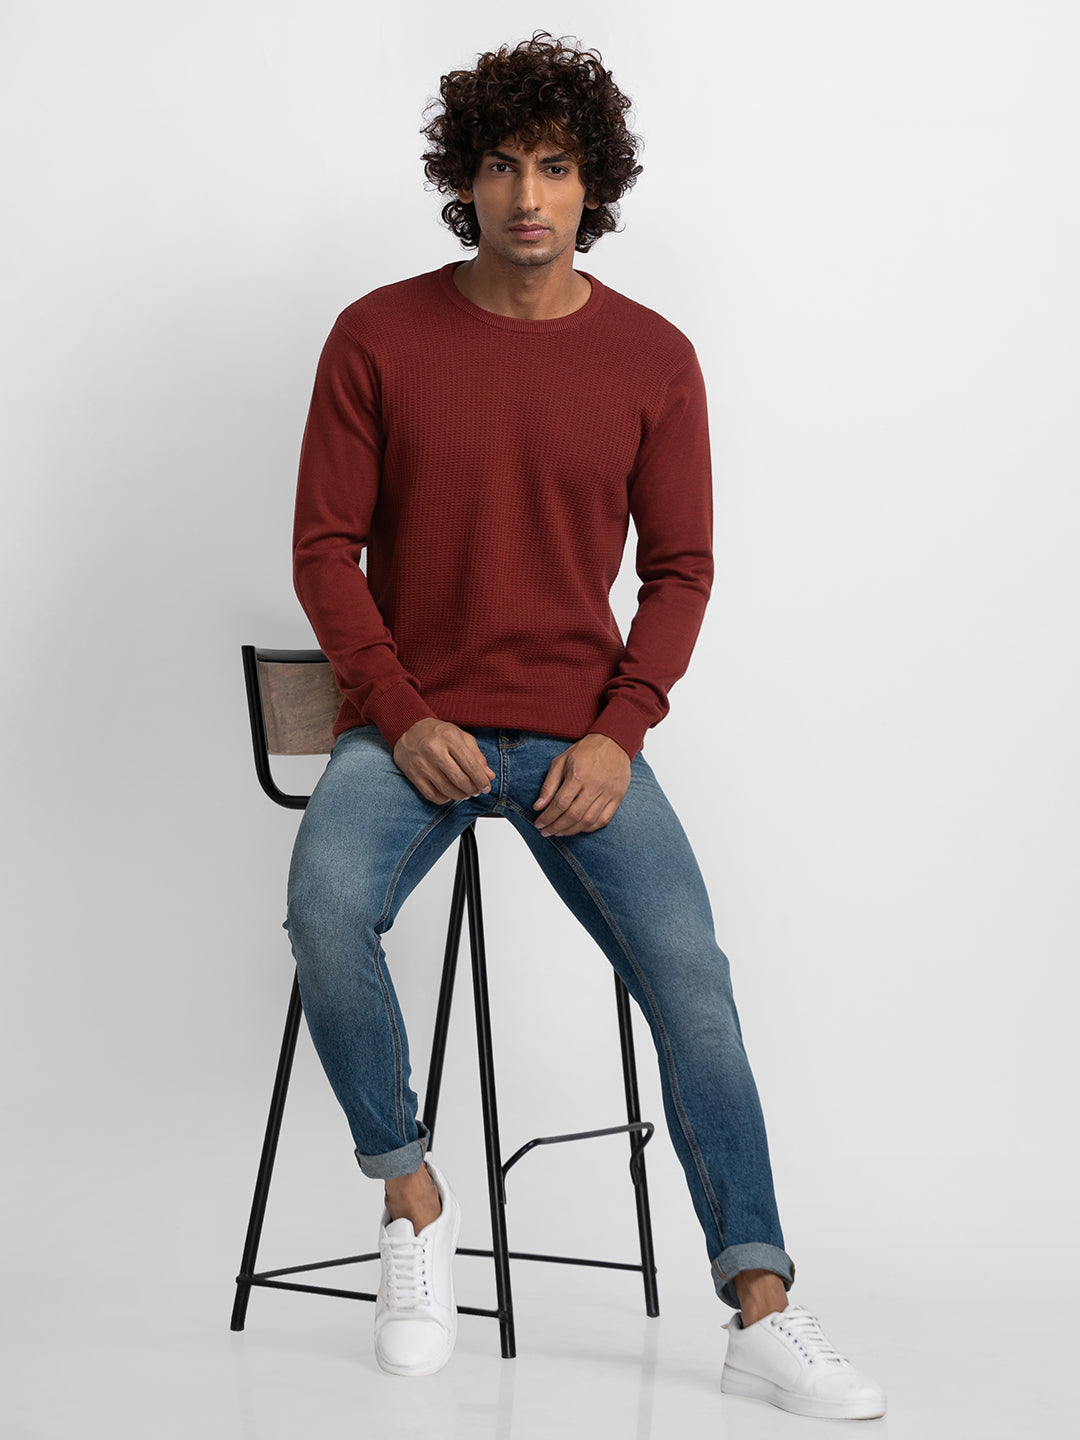 Spykar Brick Red Cotton Full Sleeve Casual Sweater For Men